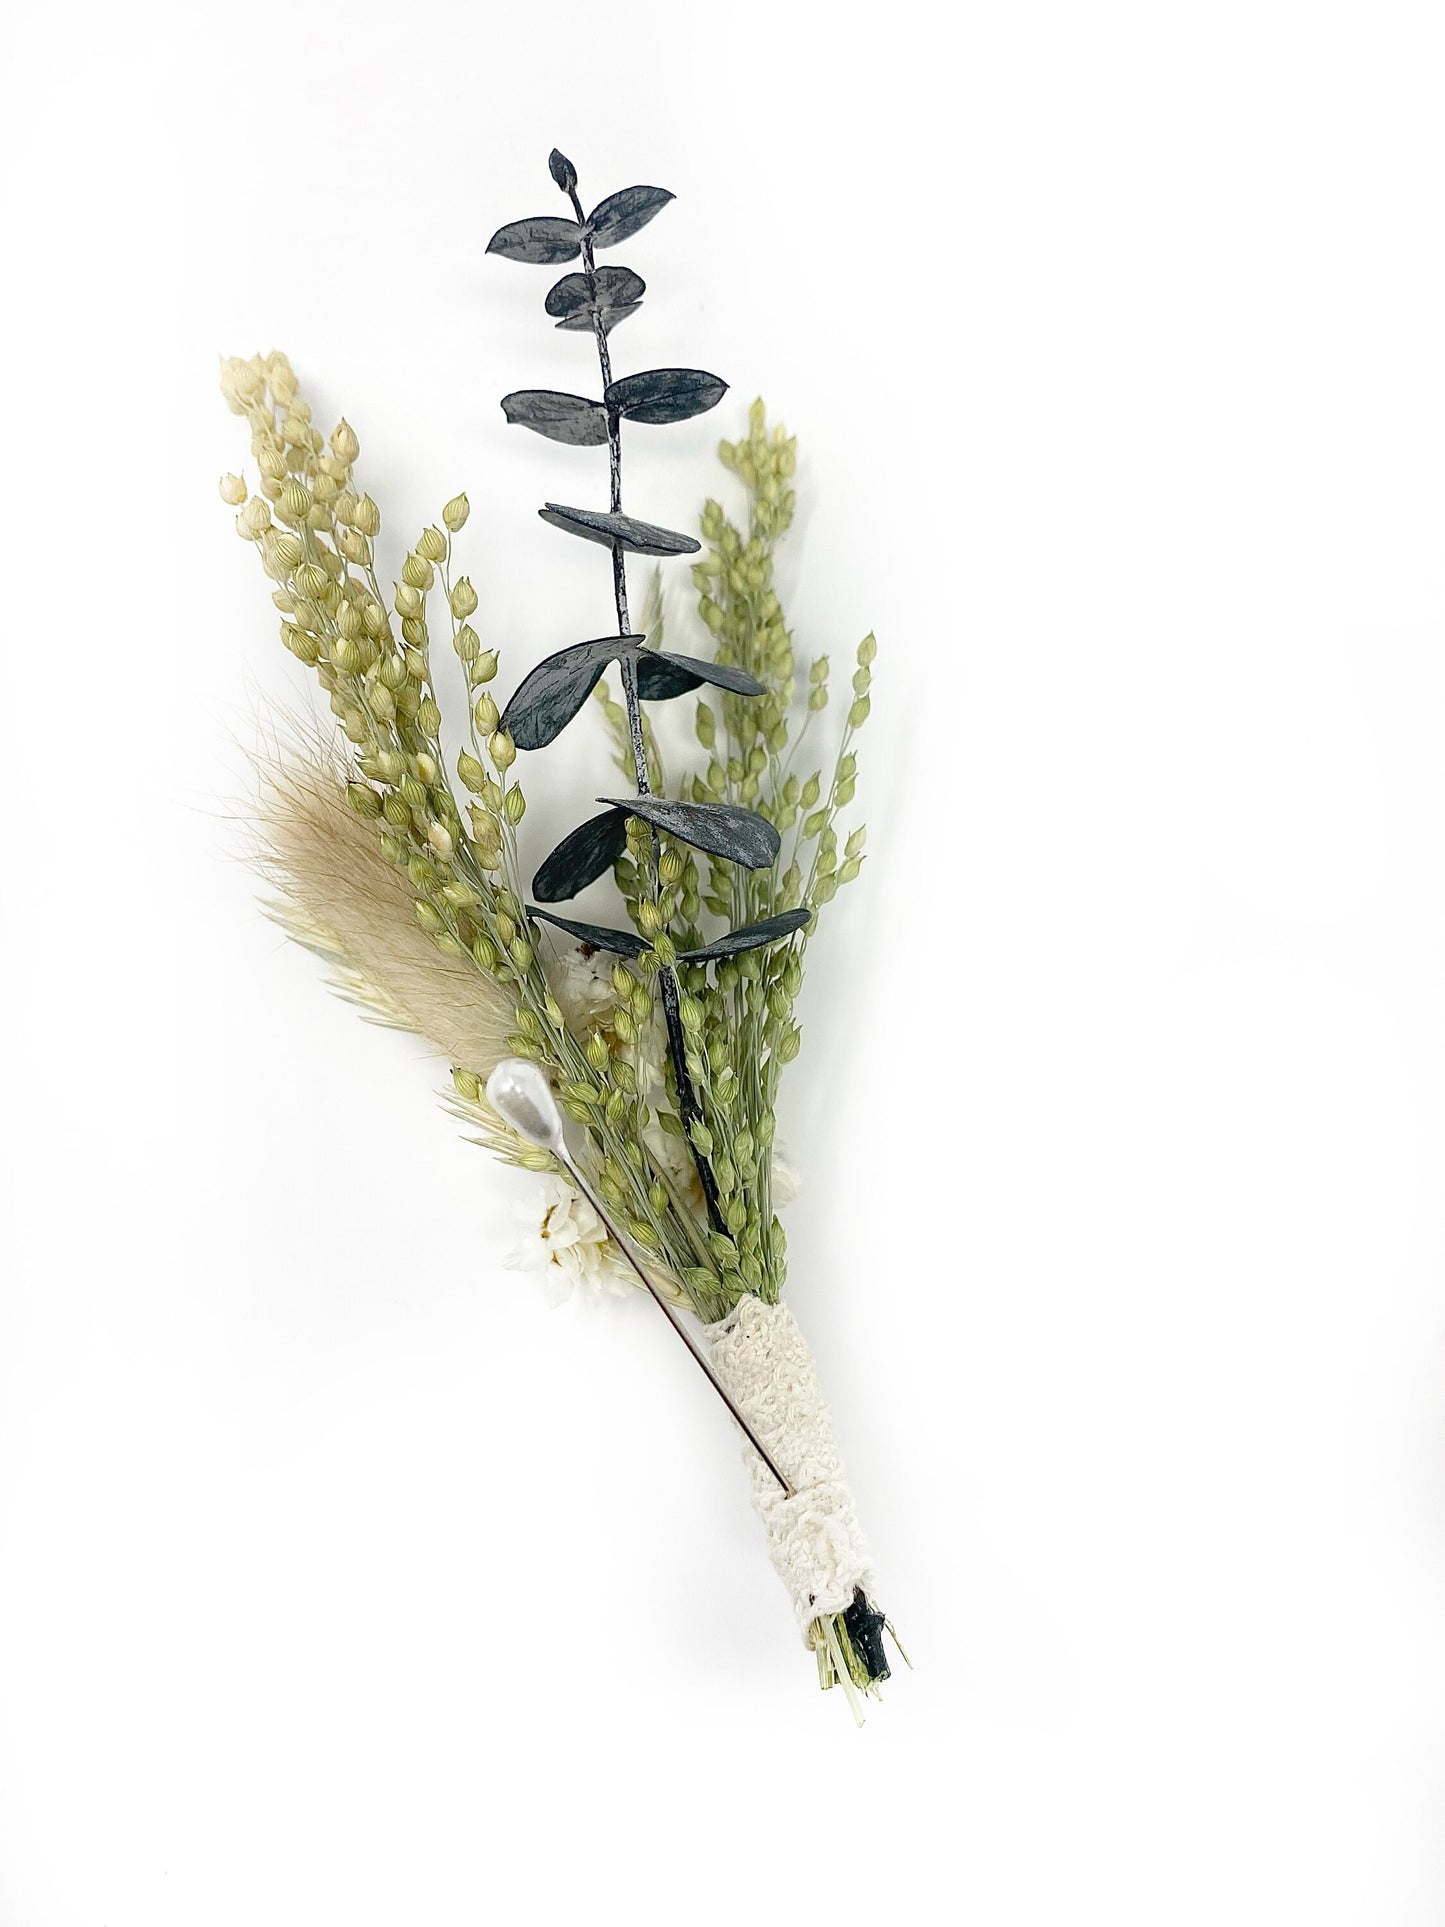 Wedding Boutonniere, Dried Flowers, Preserved Flowers, Bunny Tails, Decor, White and Green, Bridal Accessories